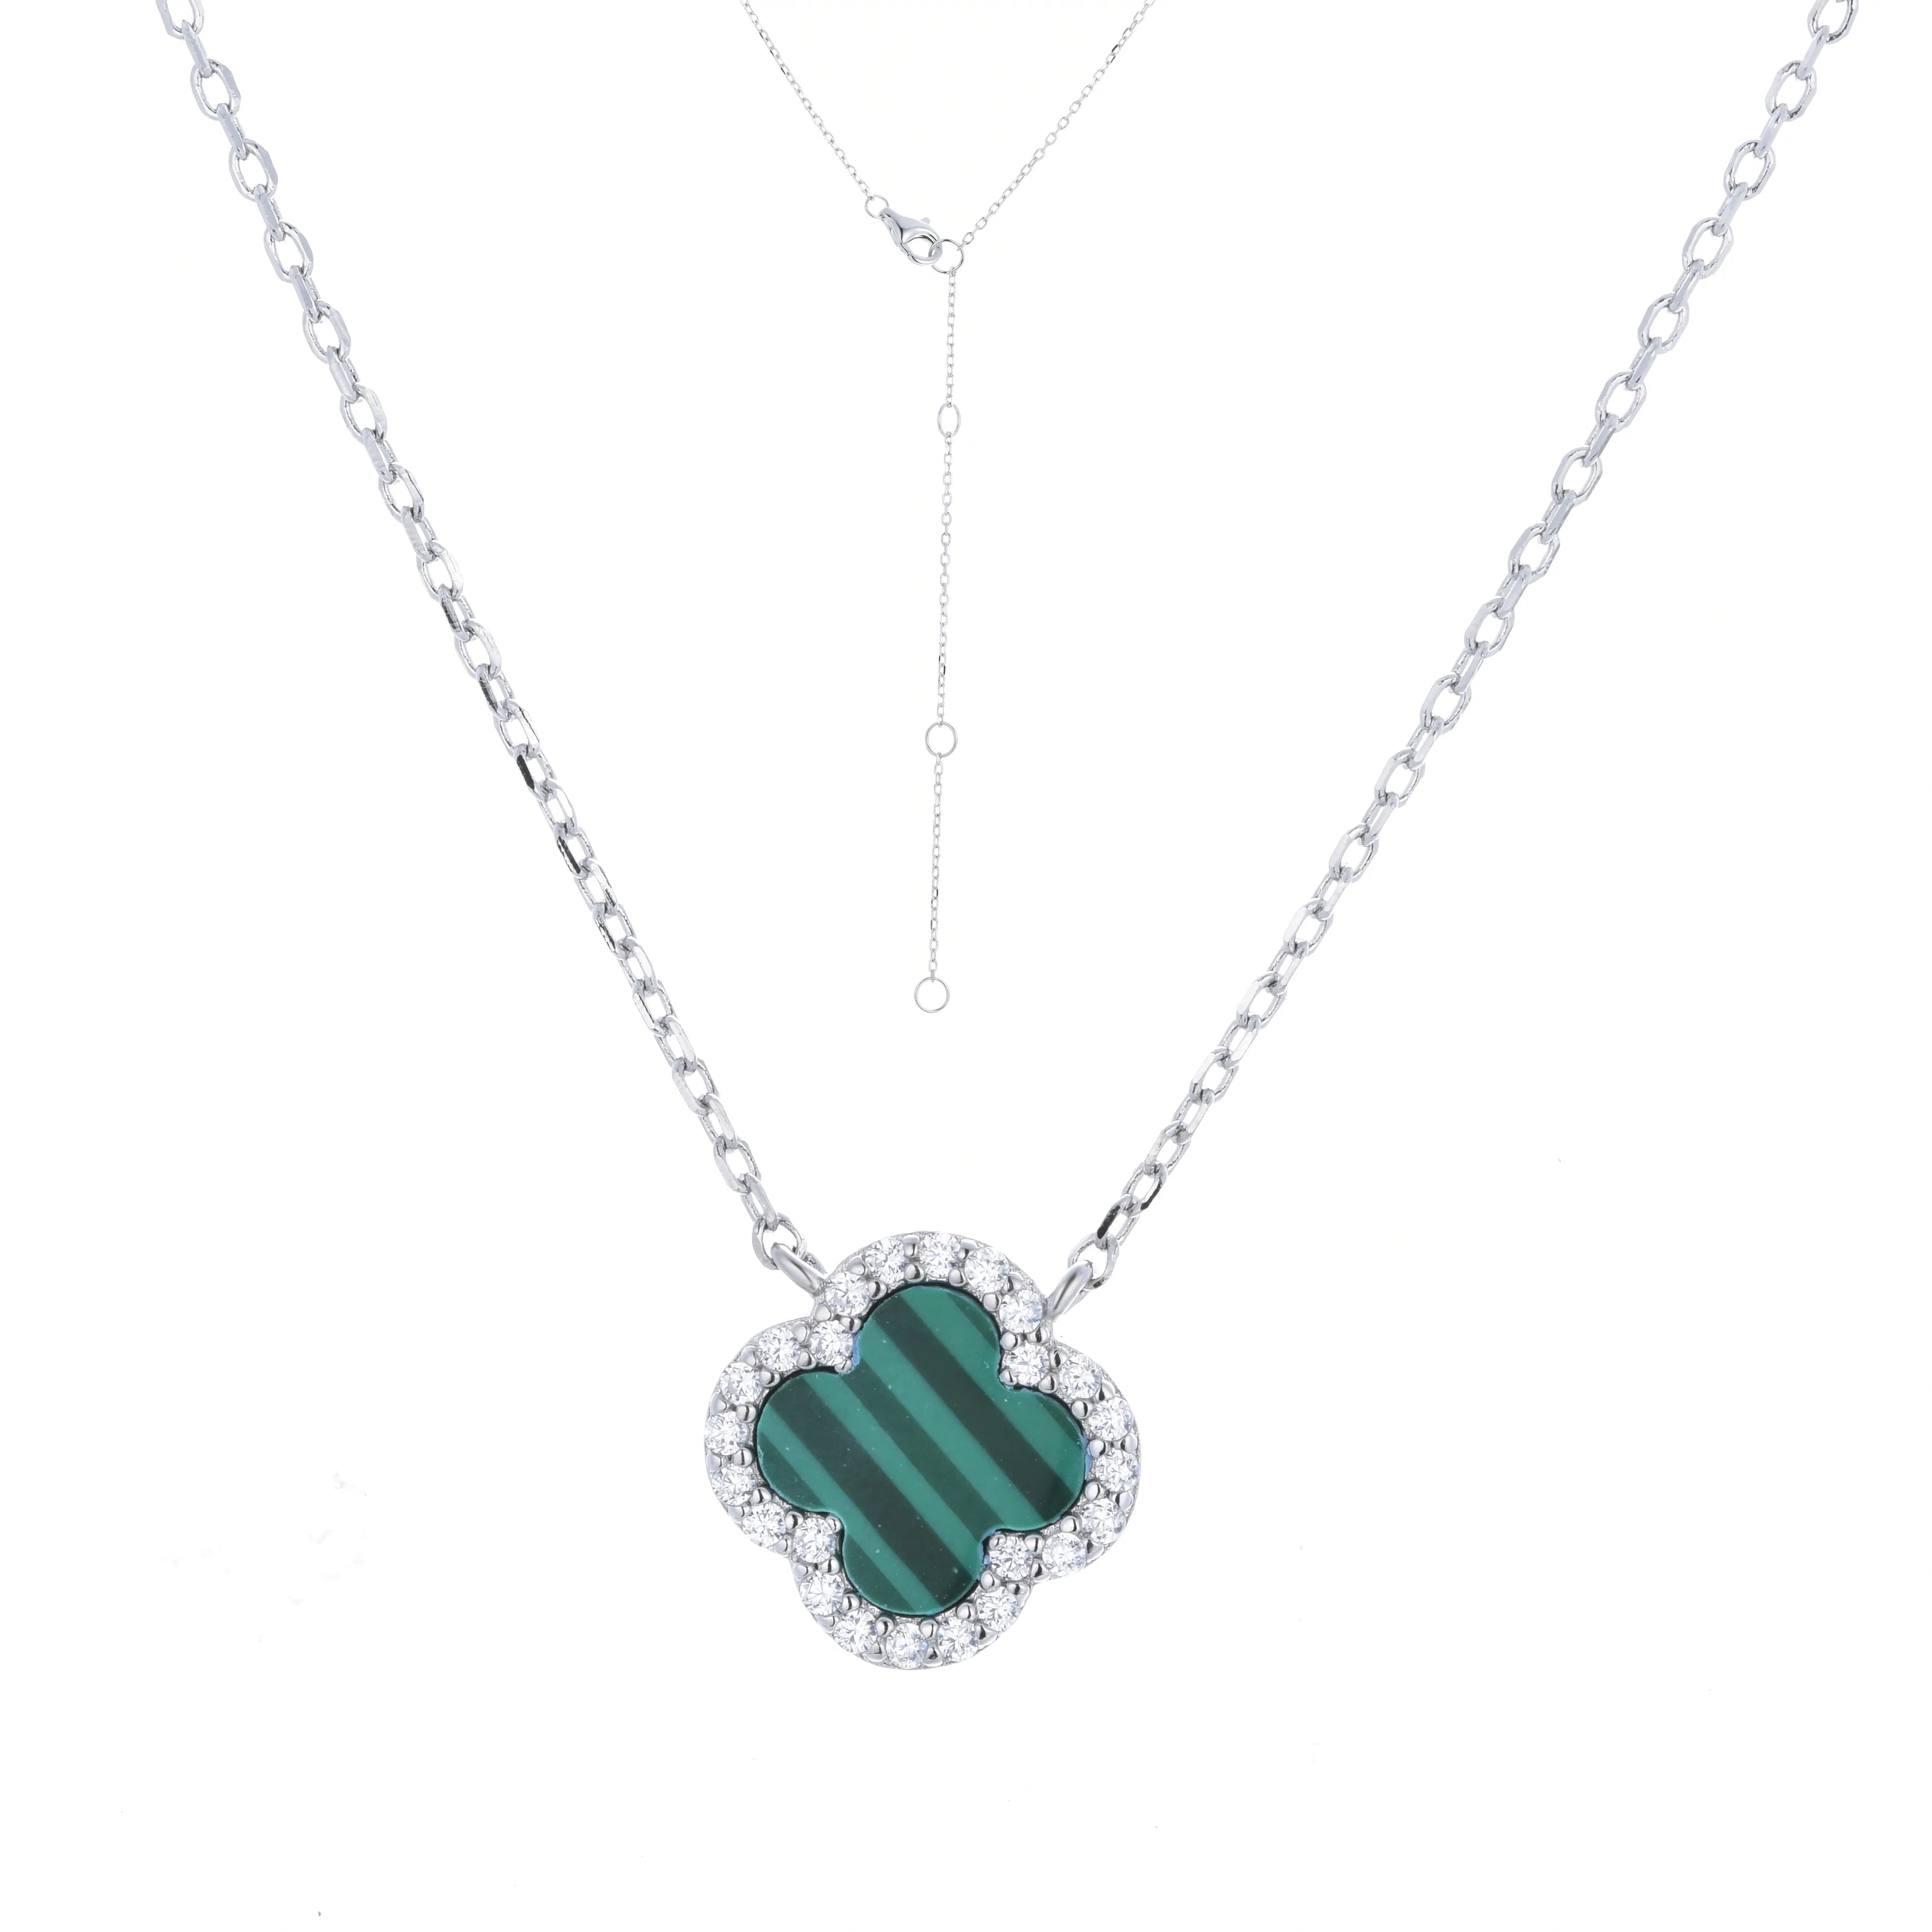 Clover Necklace with Malachite and Cubic Zirconia (Silver)